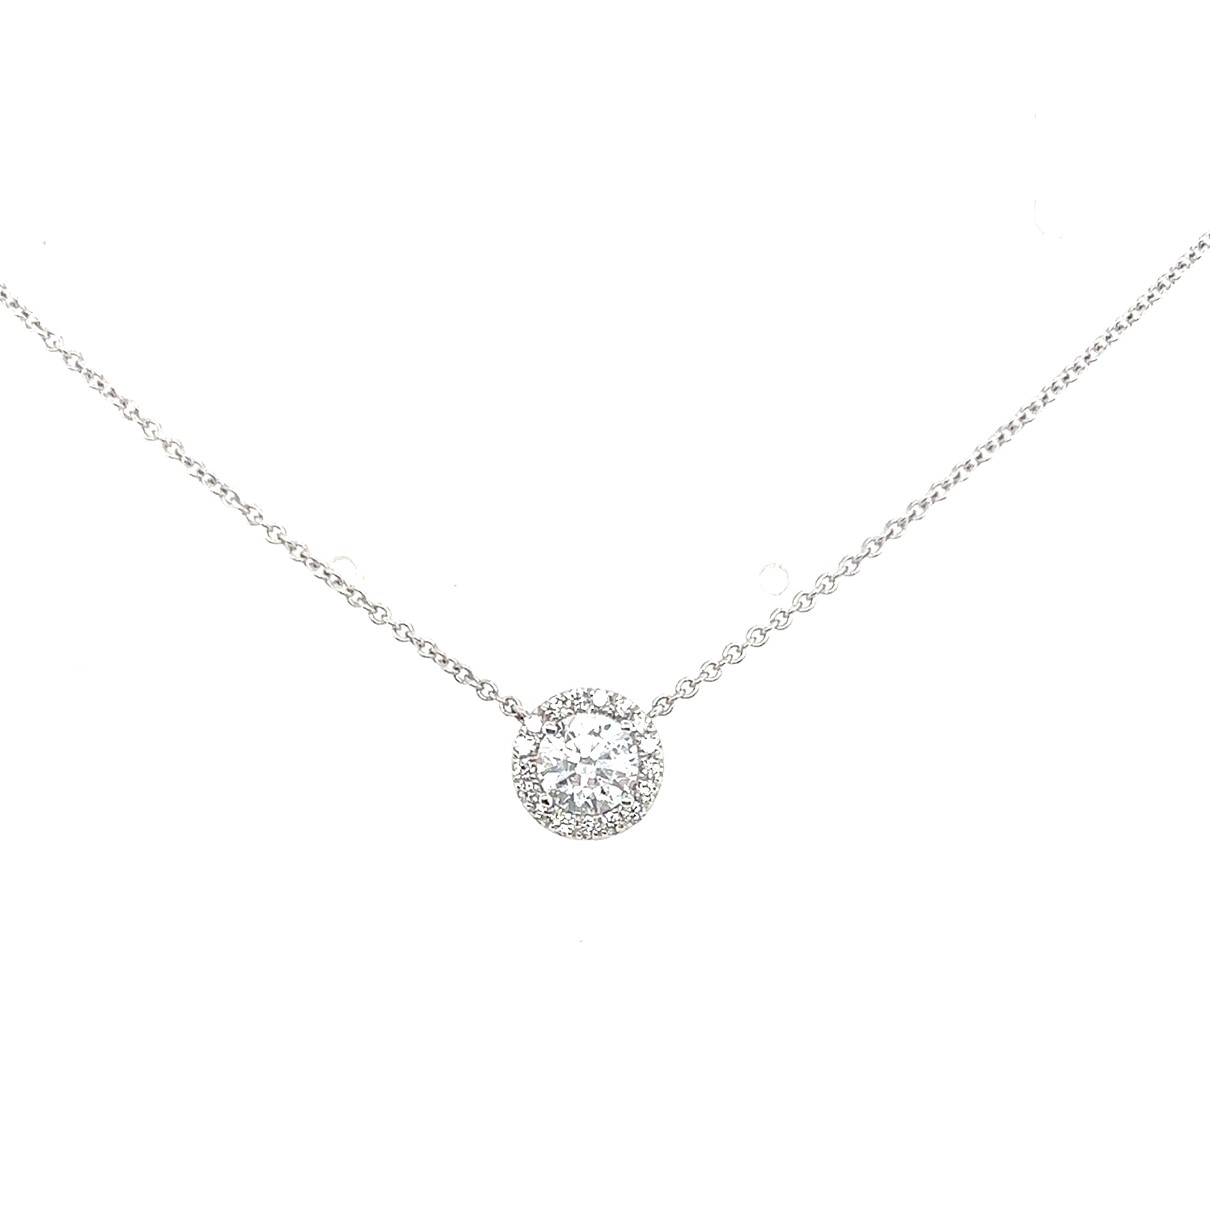 18kt White Gold Rbc Diamond Halo Pendant 0.70ct Ef/si2-i1 Center & 0.13ctw Rd Halo (0.83ctw) On 18" Cable Chain